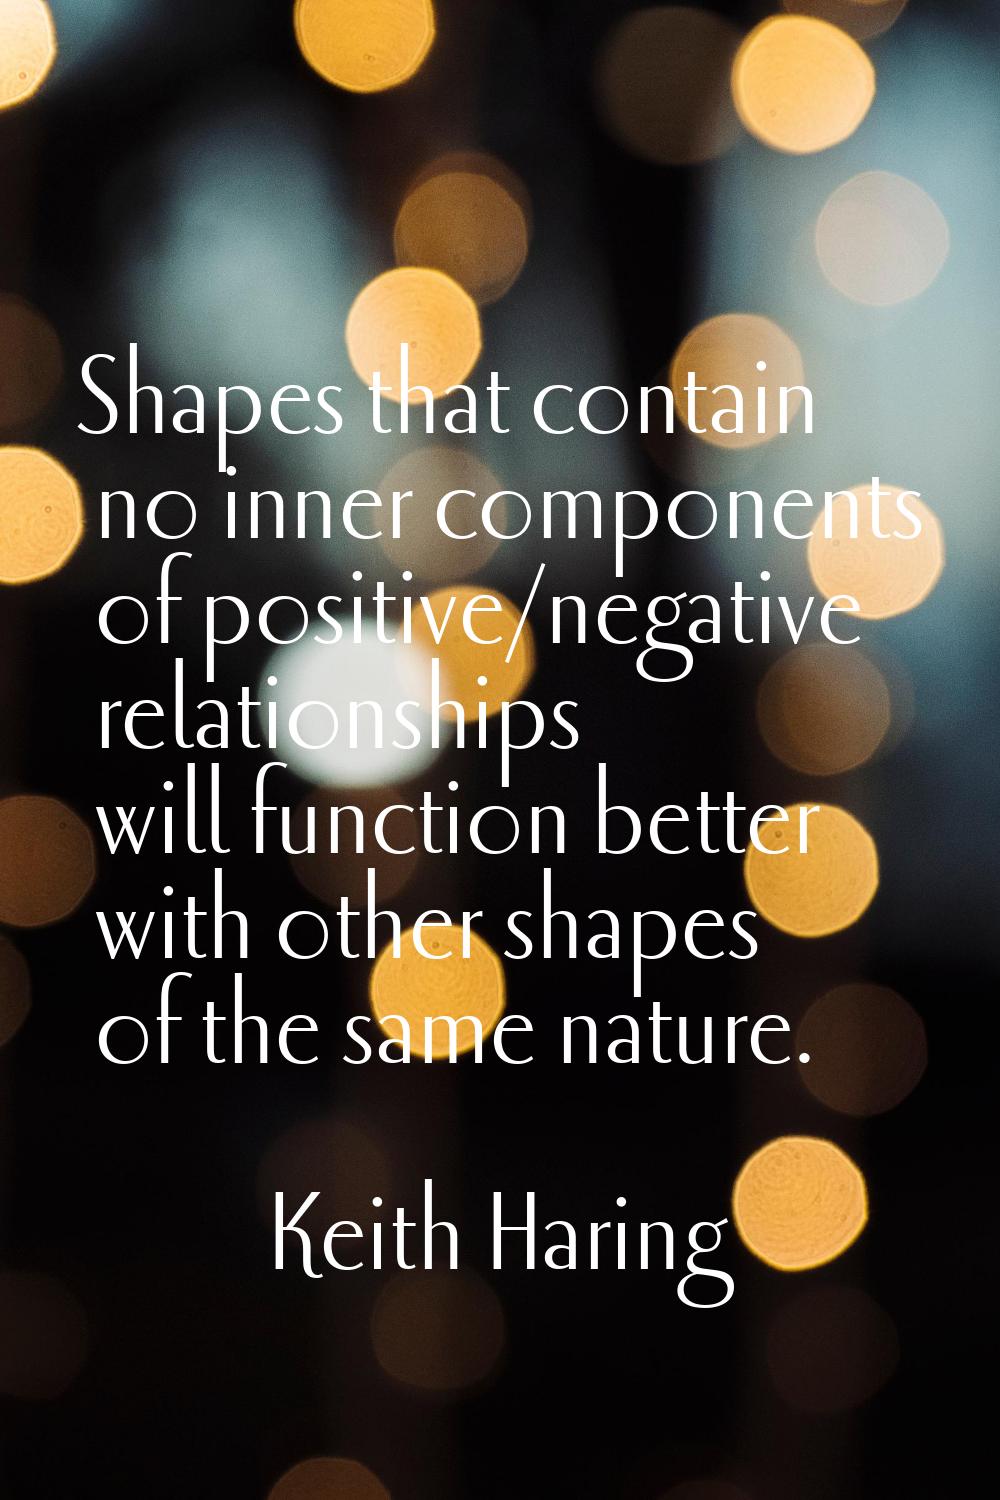 Shapes that contain no inner components of positive/negative relationships will function better wit